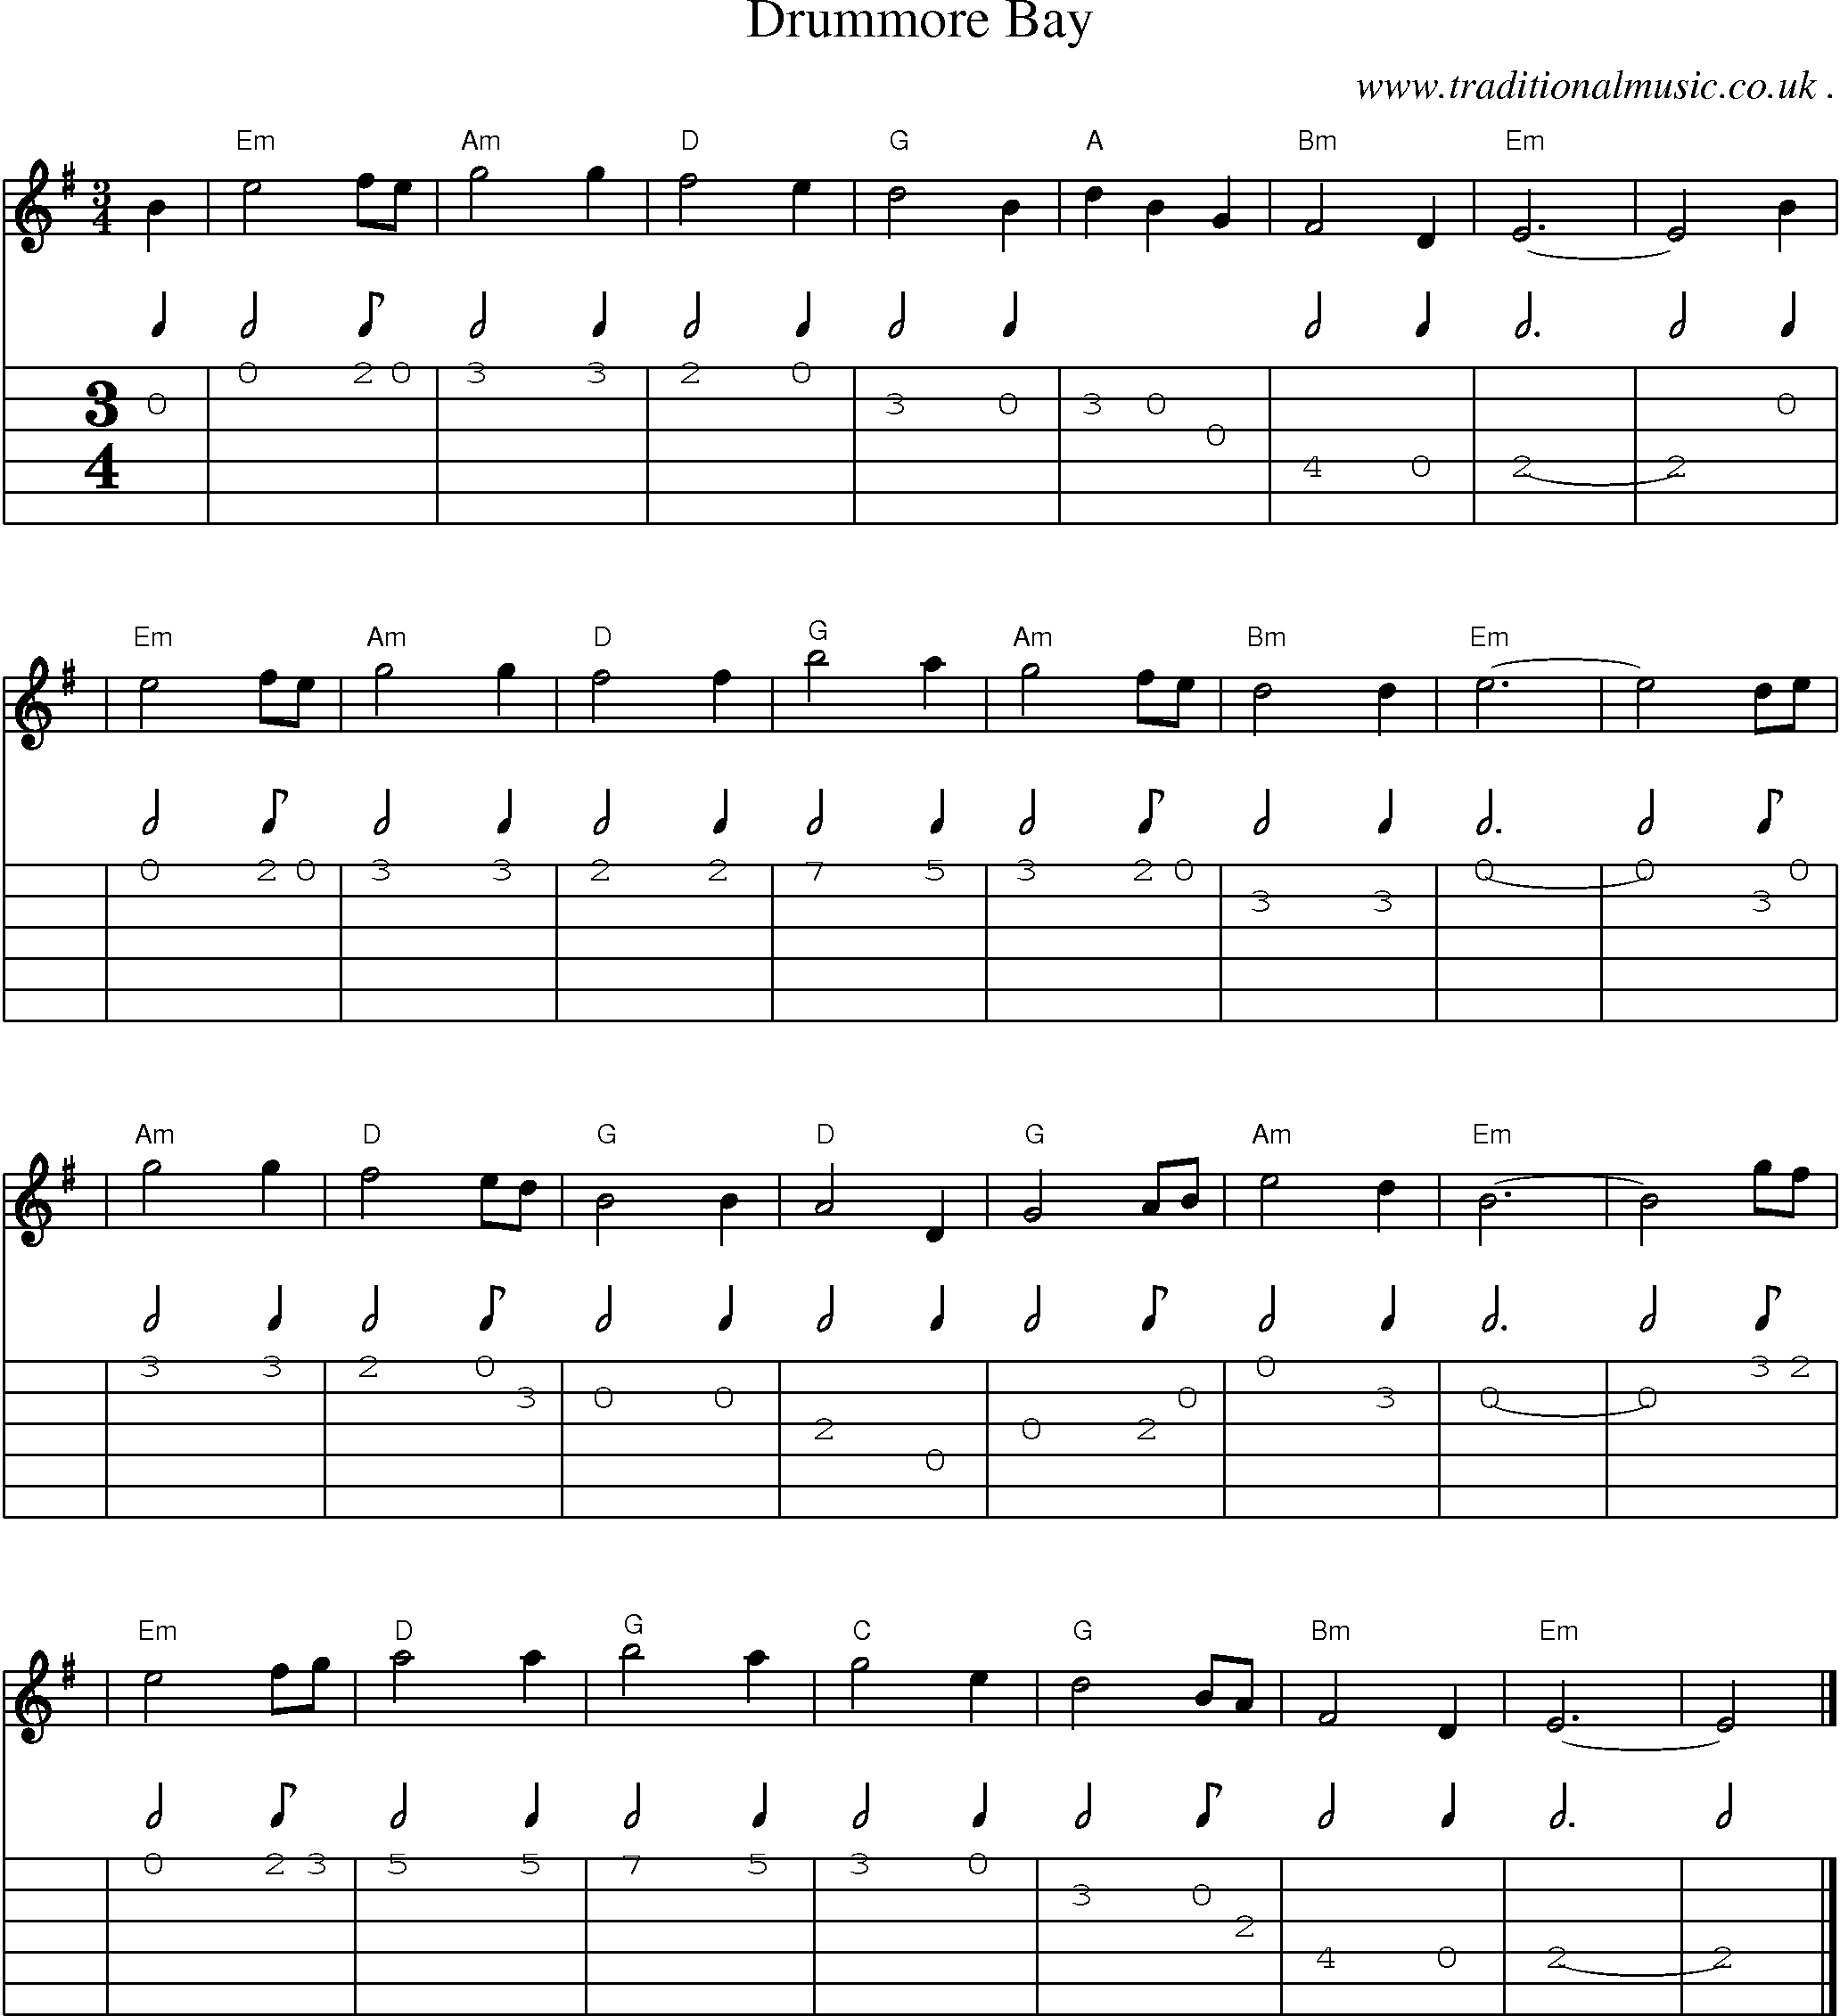 Sheet-music  score, Chords and Guitar Tabs for Drummore Bay